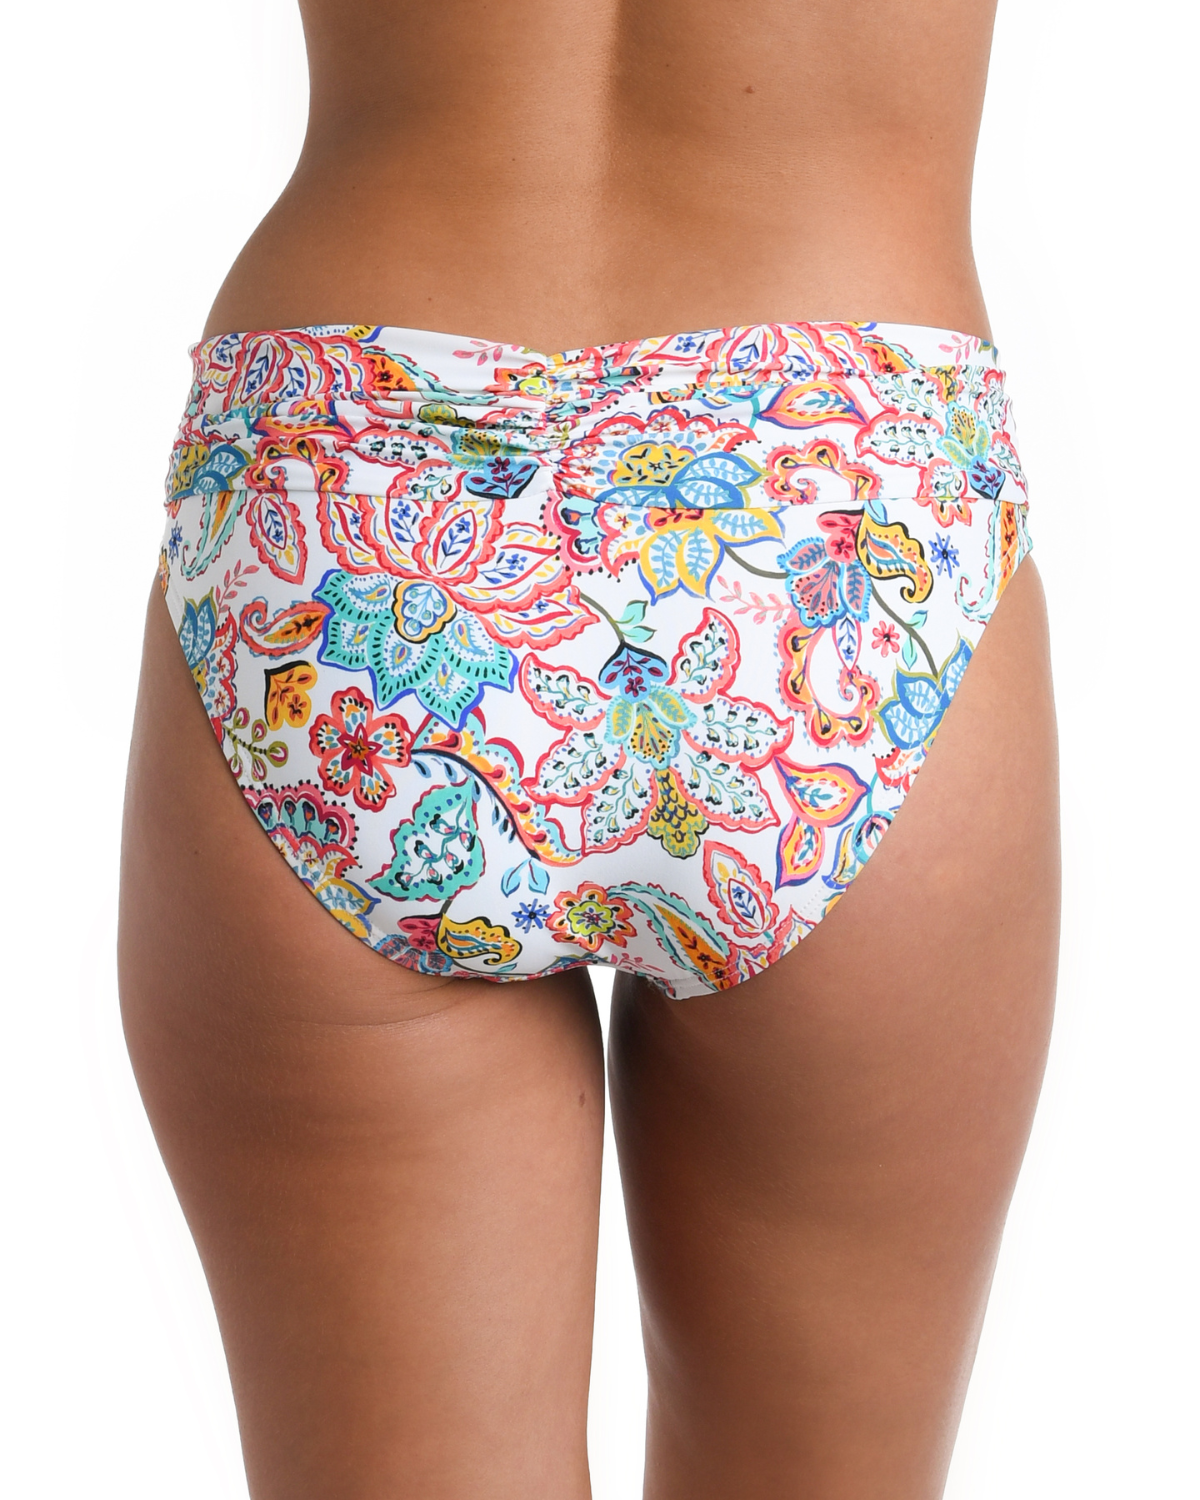 Model wearing a shirred band hipster bottom in a white multicolored gypsy floral print